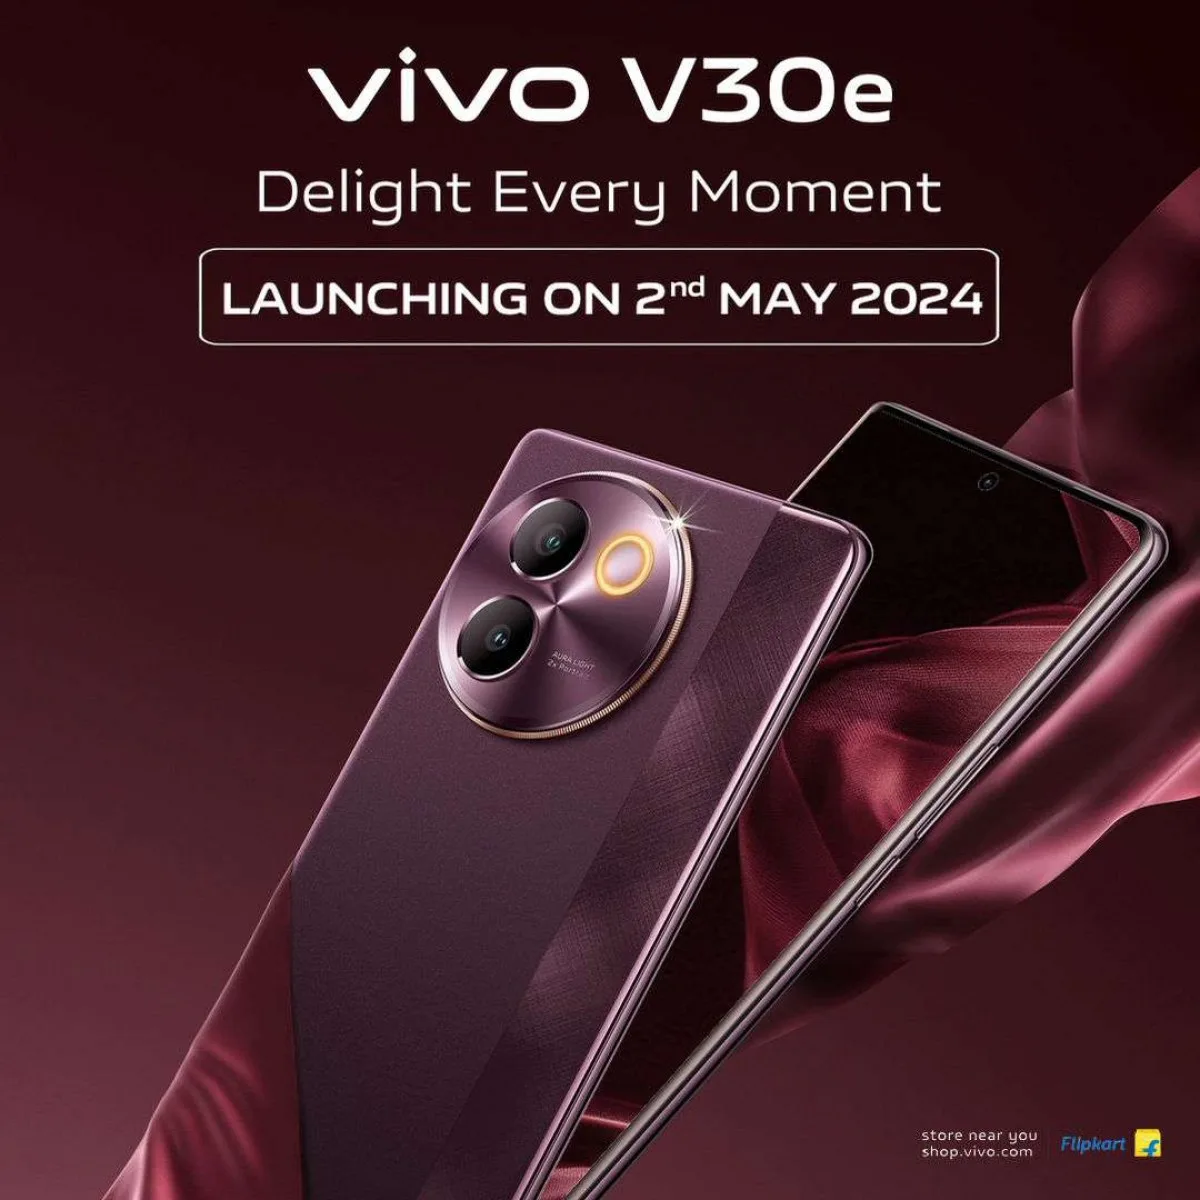 vivo confirms V30e is launching on May 2